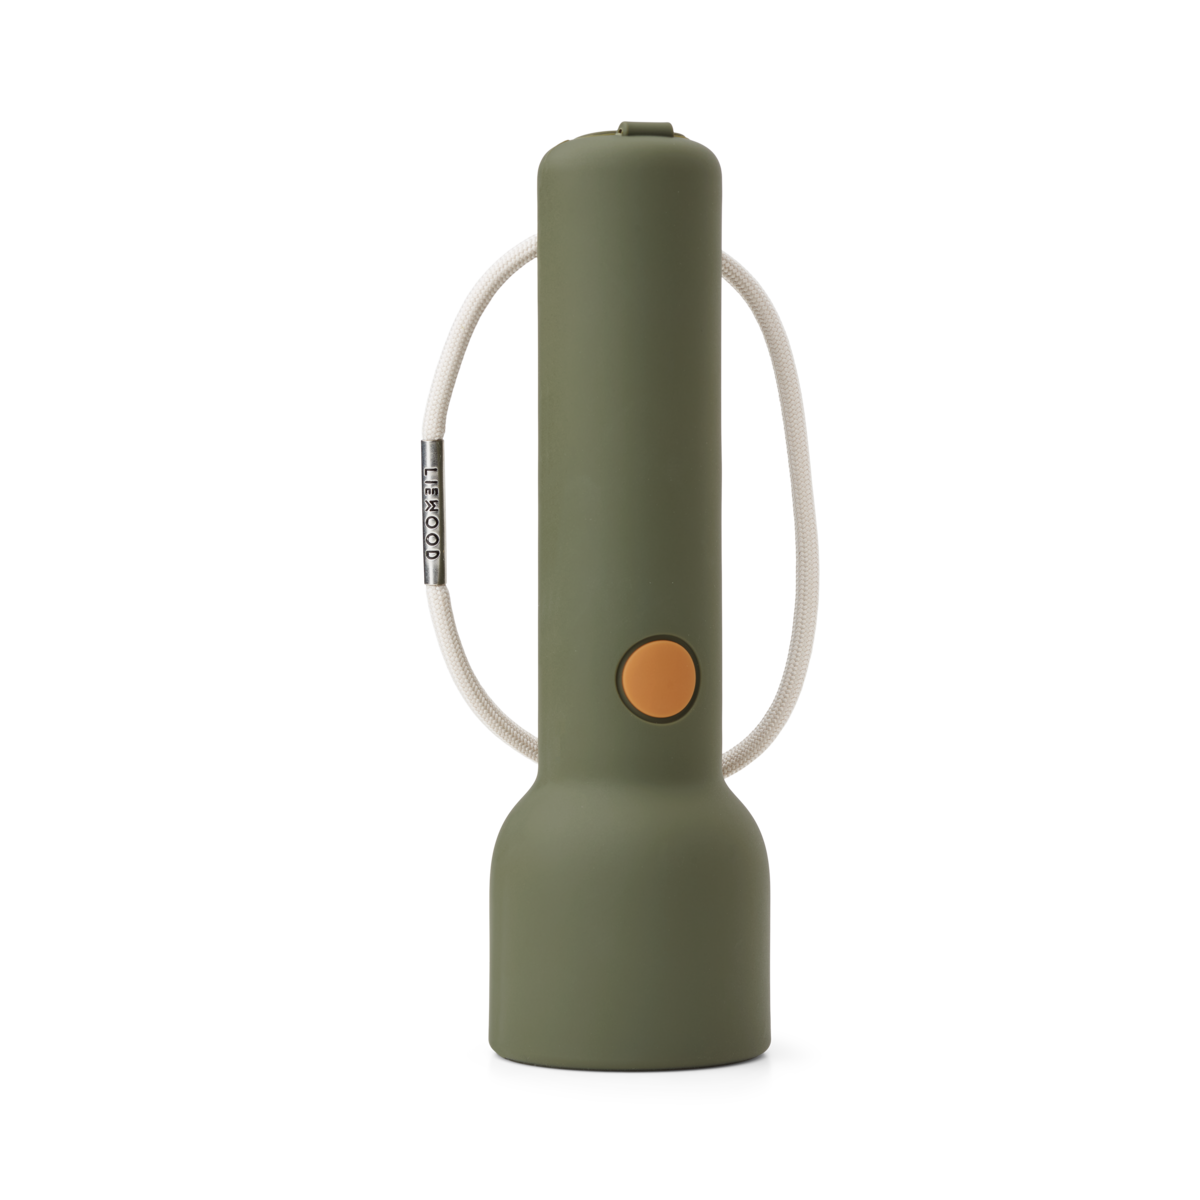 Lampe torche rechargeable gry Army / golden caramel mix Liewood